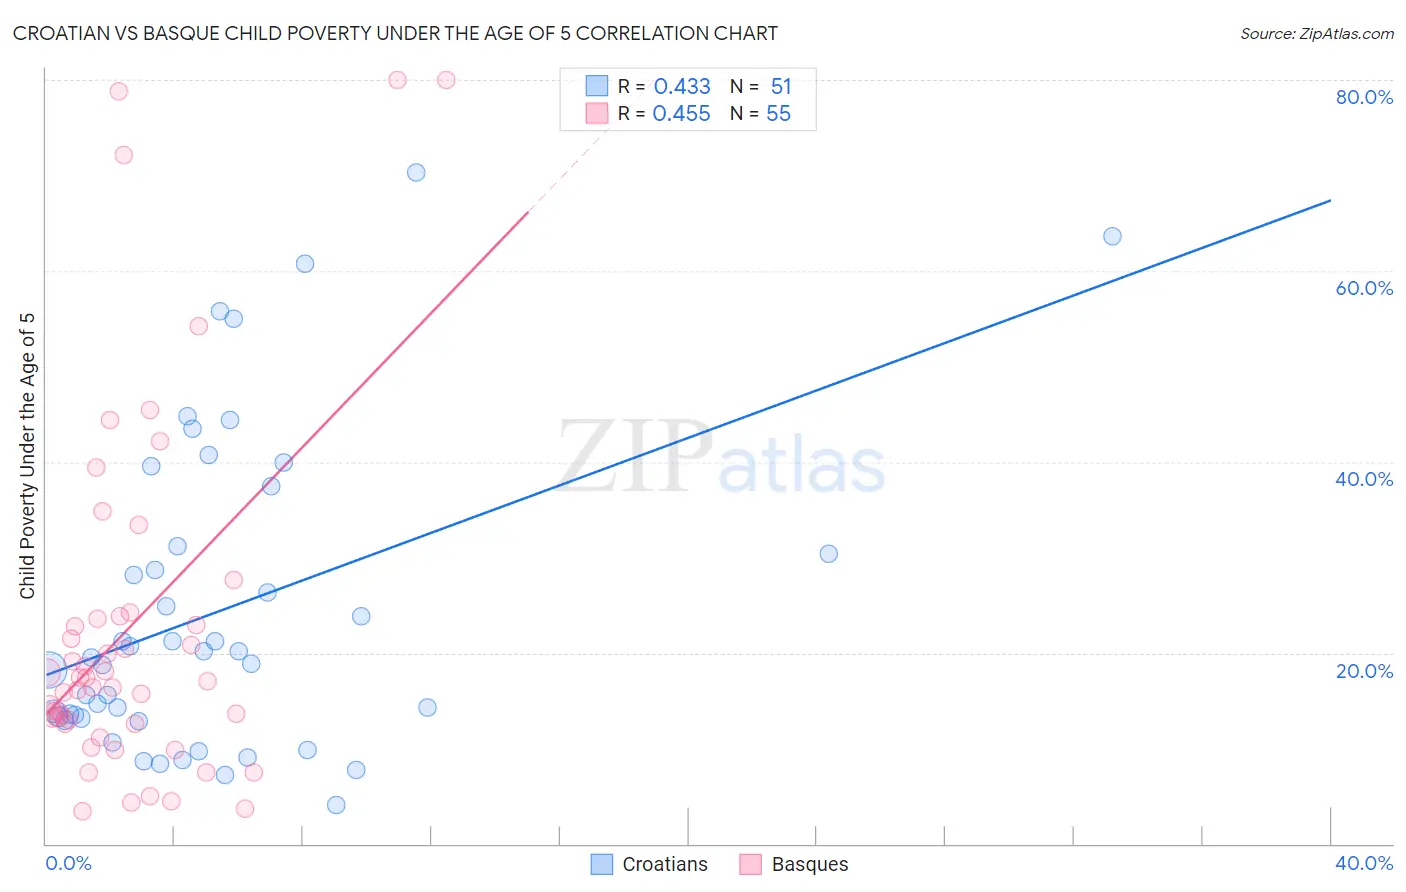 Croatian vs Basque Child Poverty Under the Age of 5